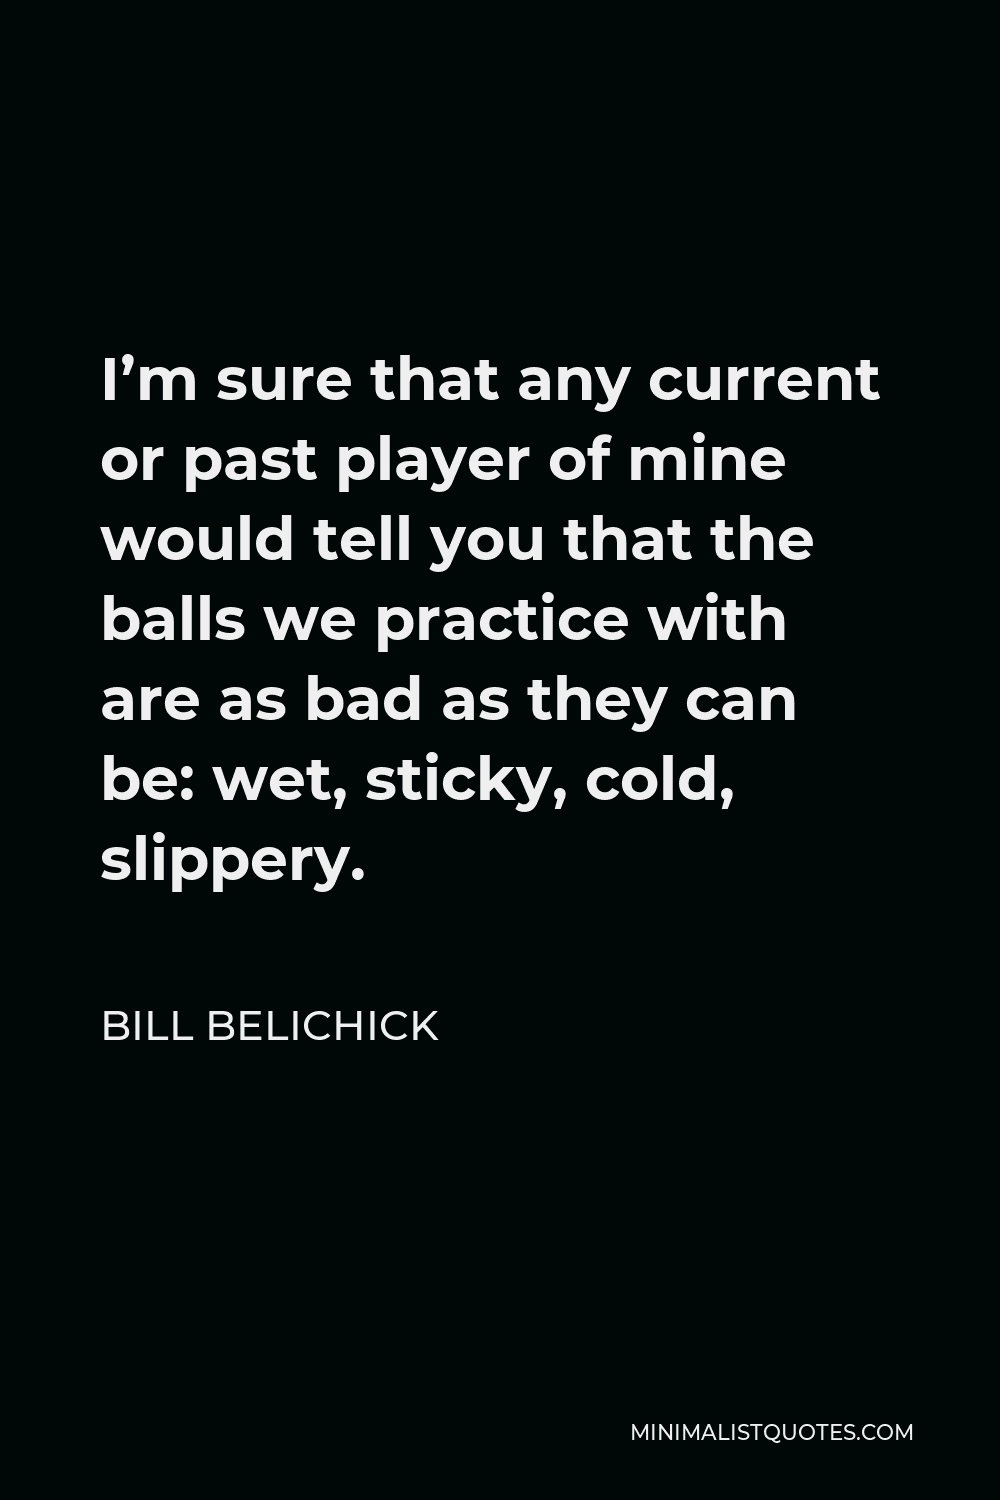 Bill Belichick Quote - I’m sure that any current or past player of mine would tell you that the balls we practice with are as bad as they can be: wet, sticky, cold, slippery.